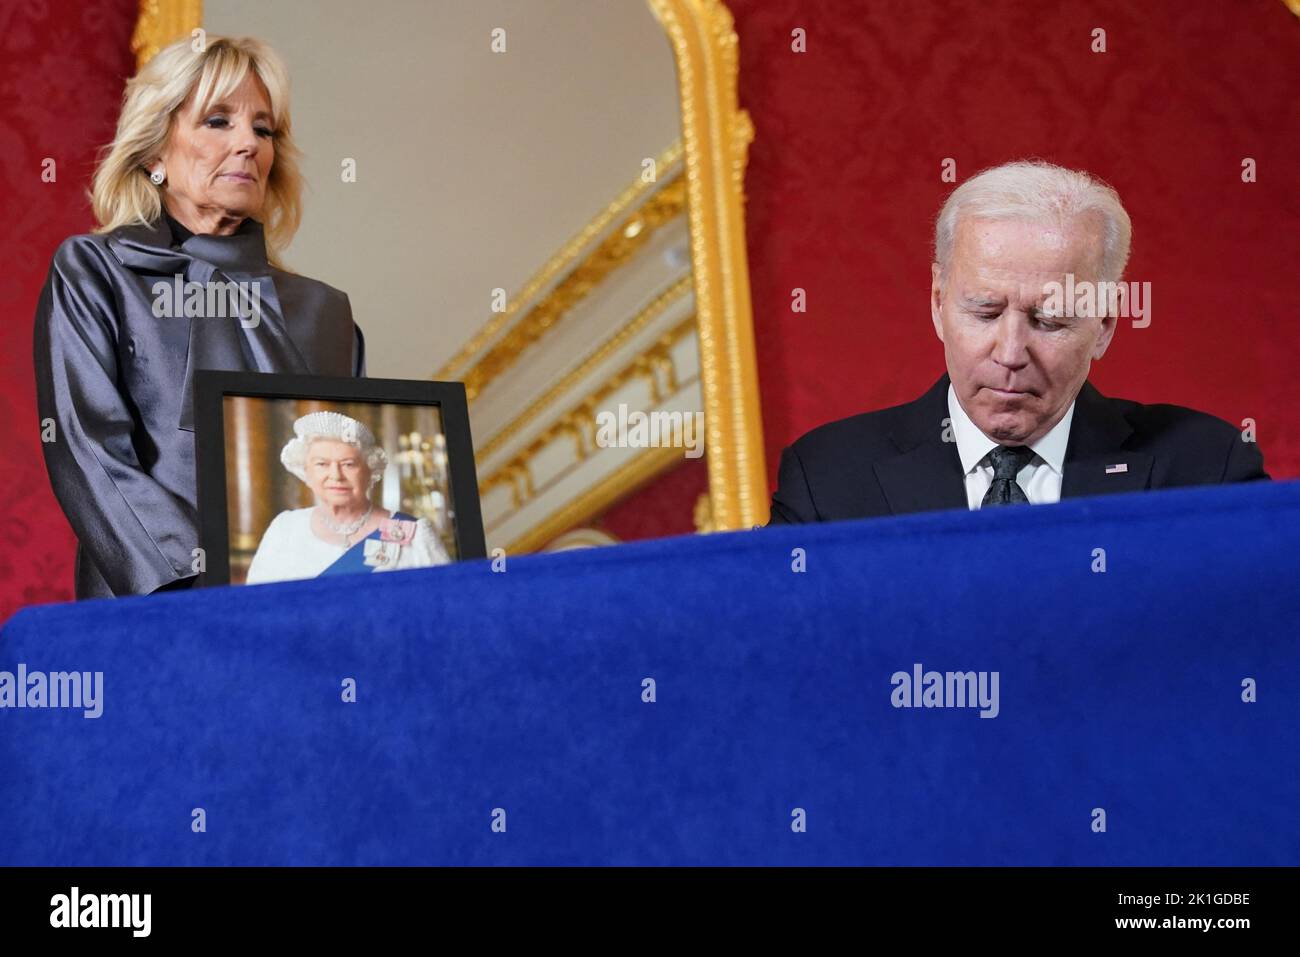 U.S. President Joe Biden, accompanied by first lady Jill Biden, signs a condolence book for Britain's Queen Elizabeth, following her death, at Lancaster House in London, Britain, September 18, 2022. REUTERS/Kevin Lamarque Stock Photo